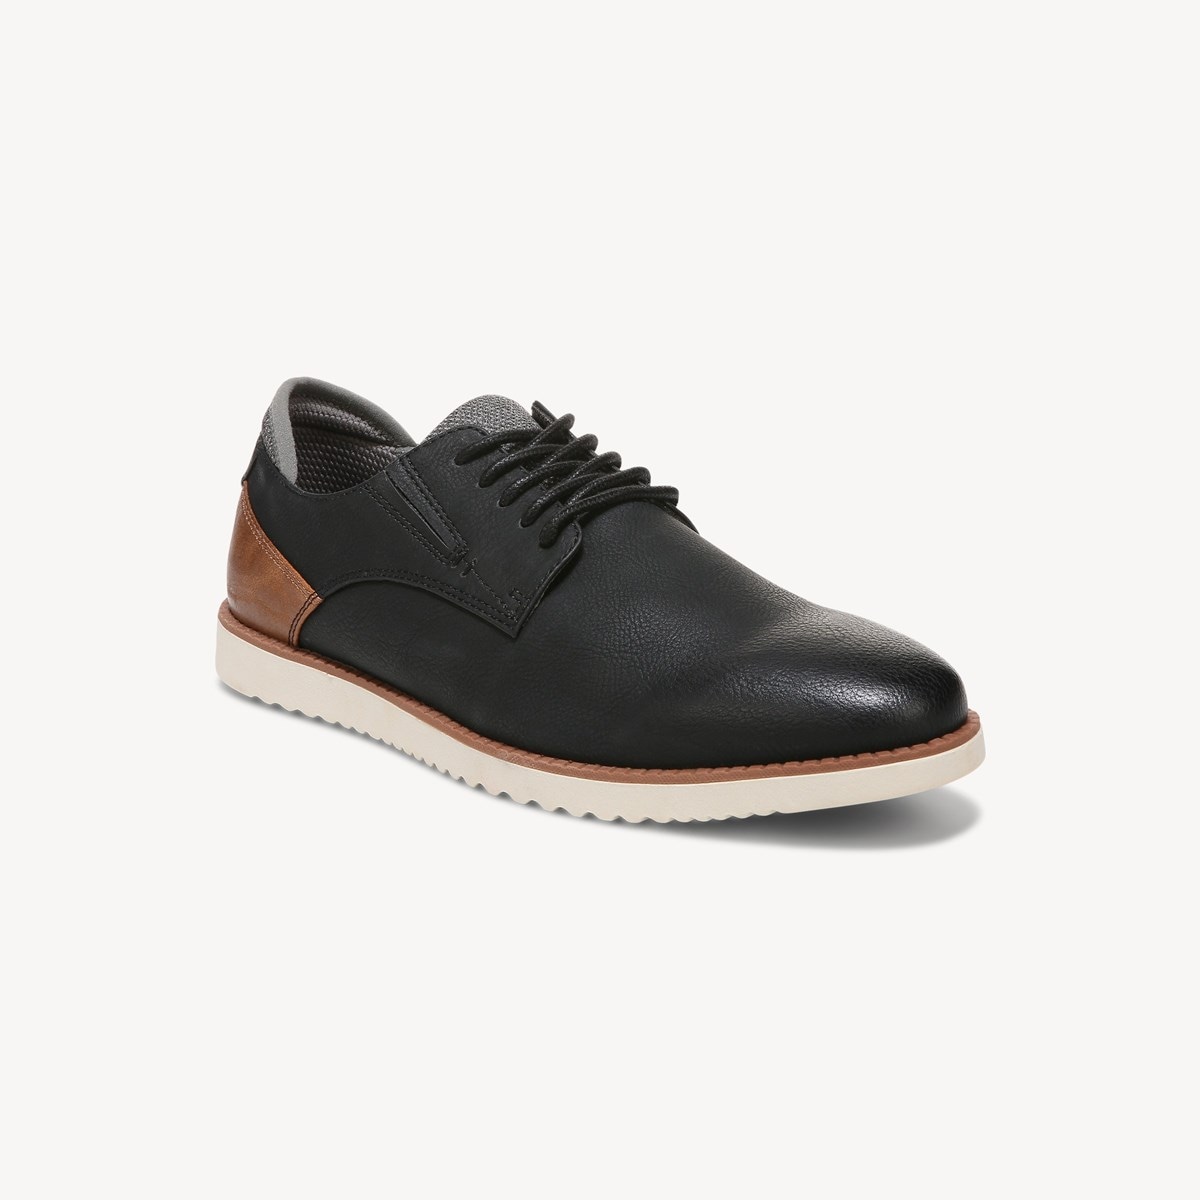 Dr. Scholl's Sync 2 Oxford | Mens Oxfords